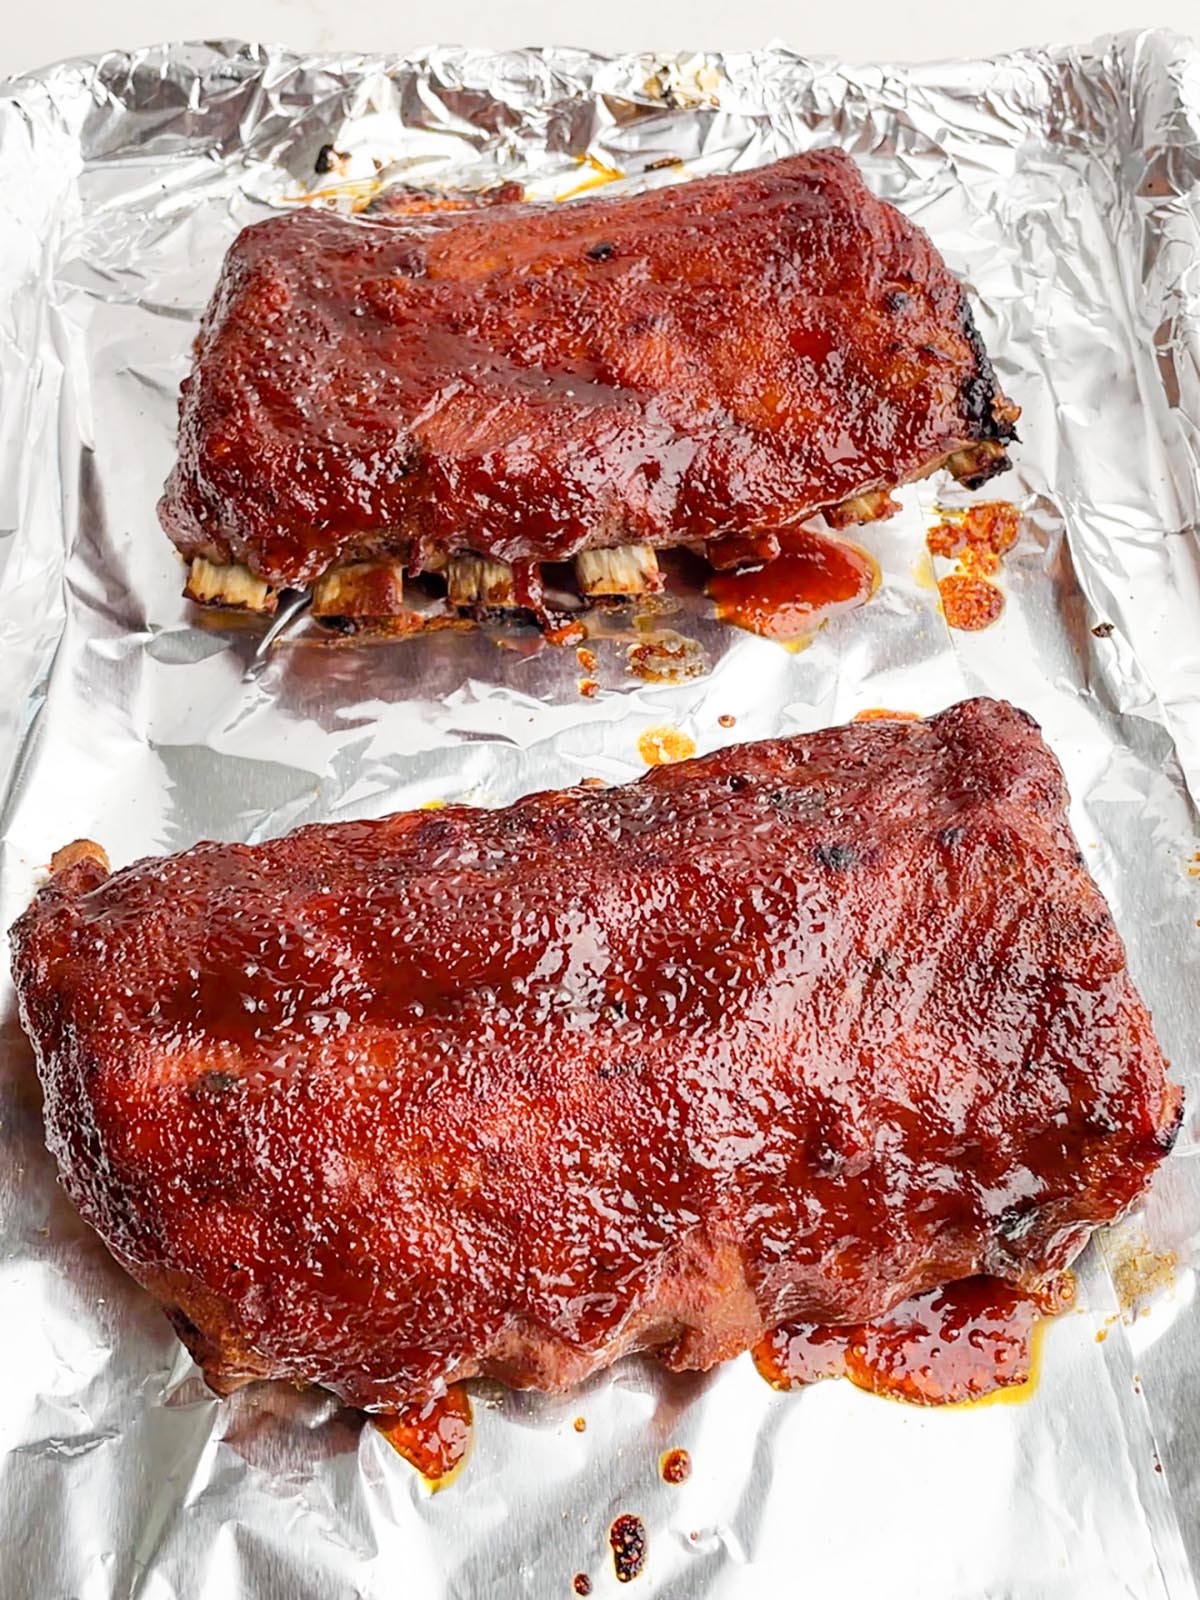 two half racks of ribs on a foil lined baking sheet.